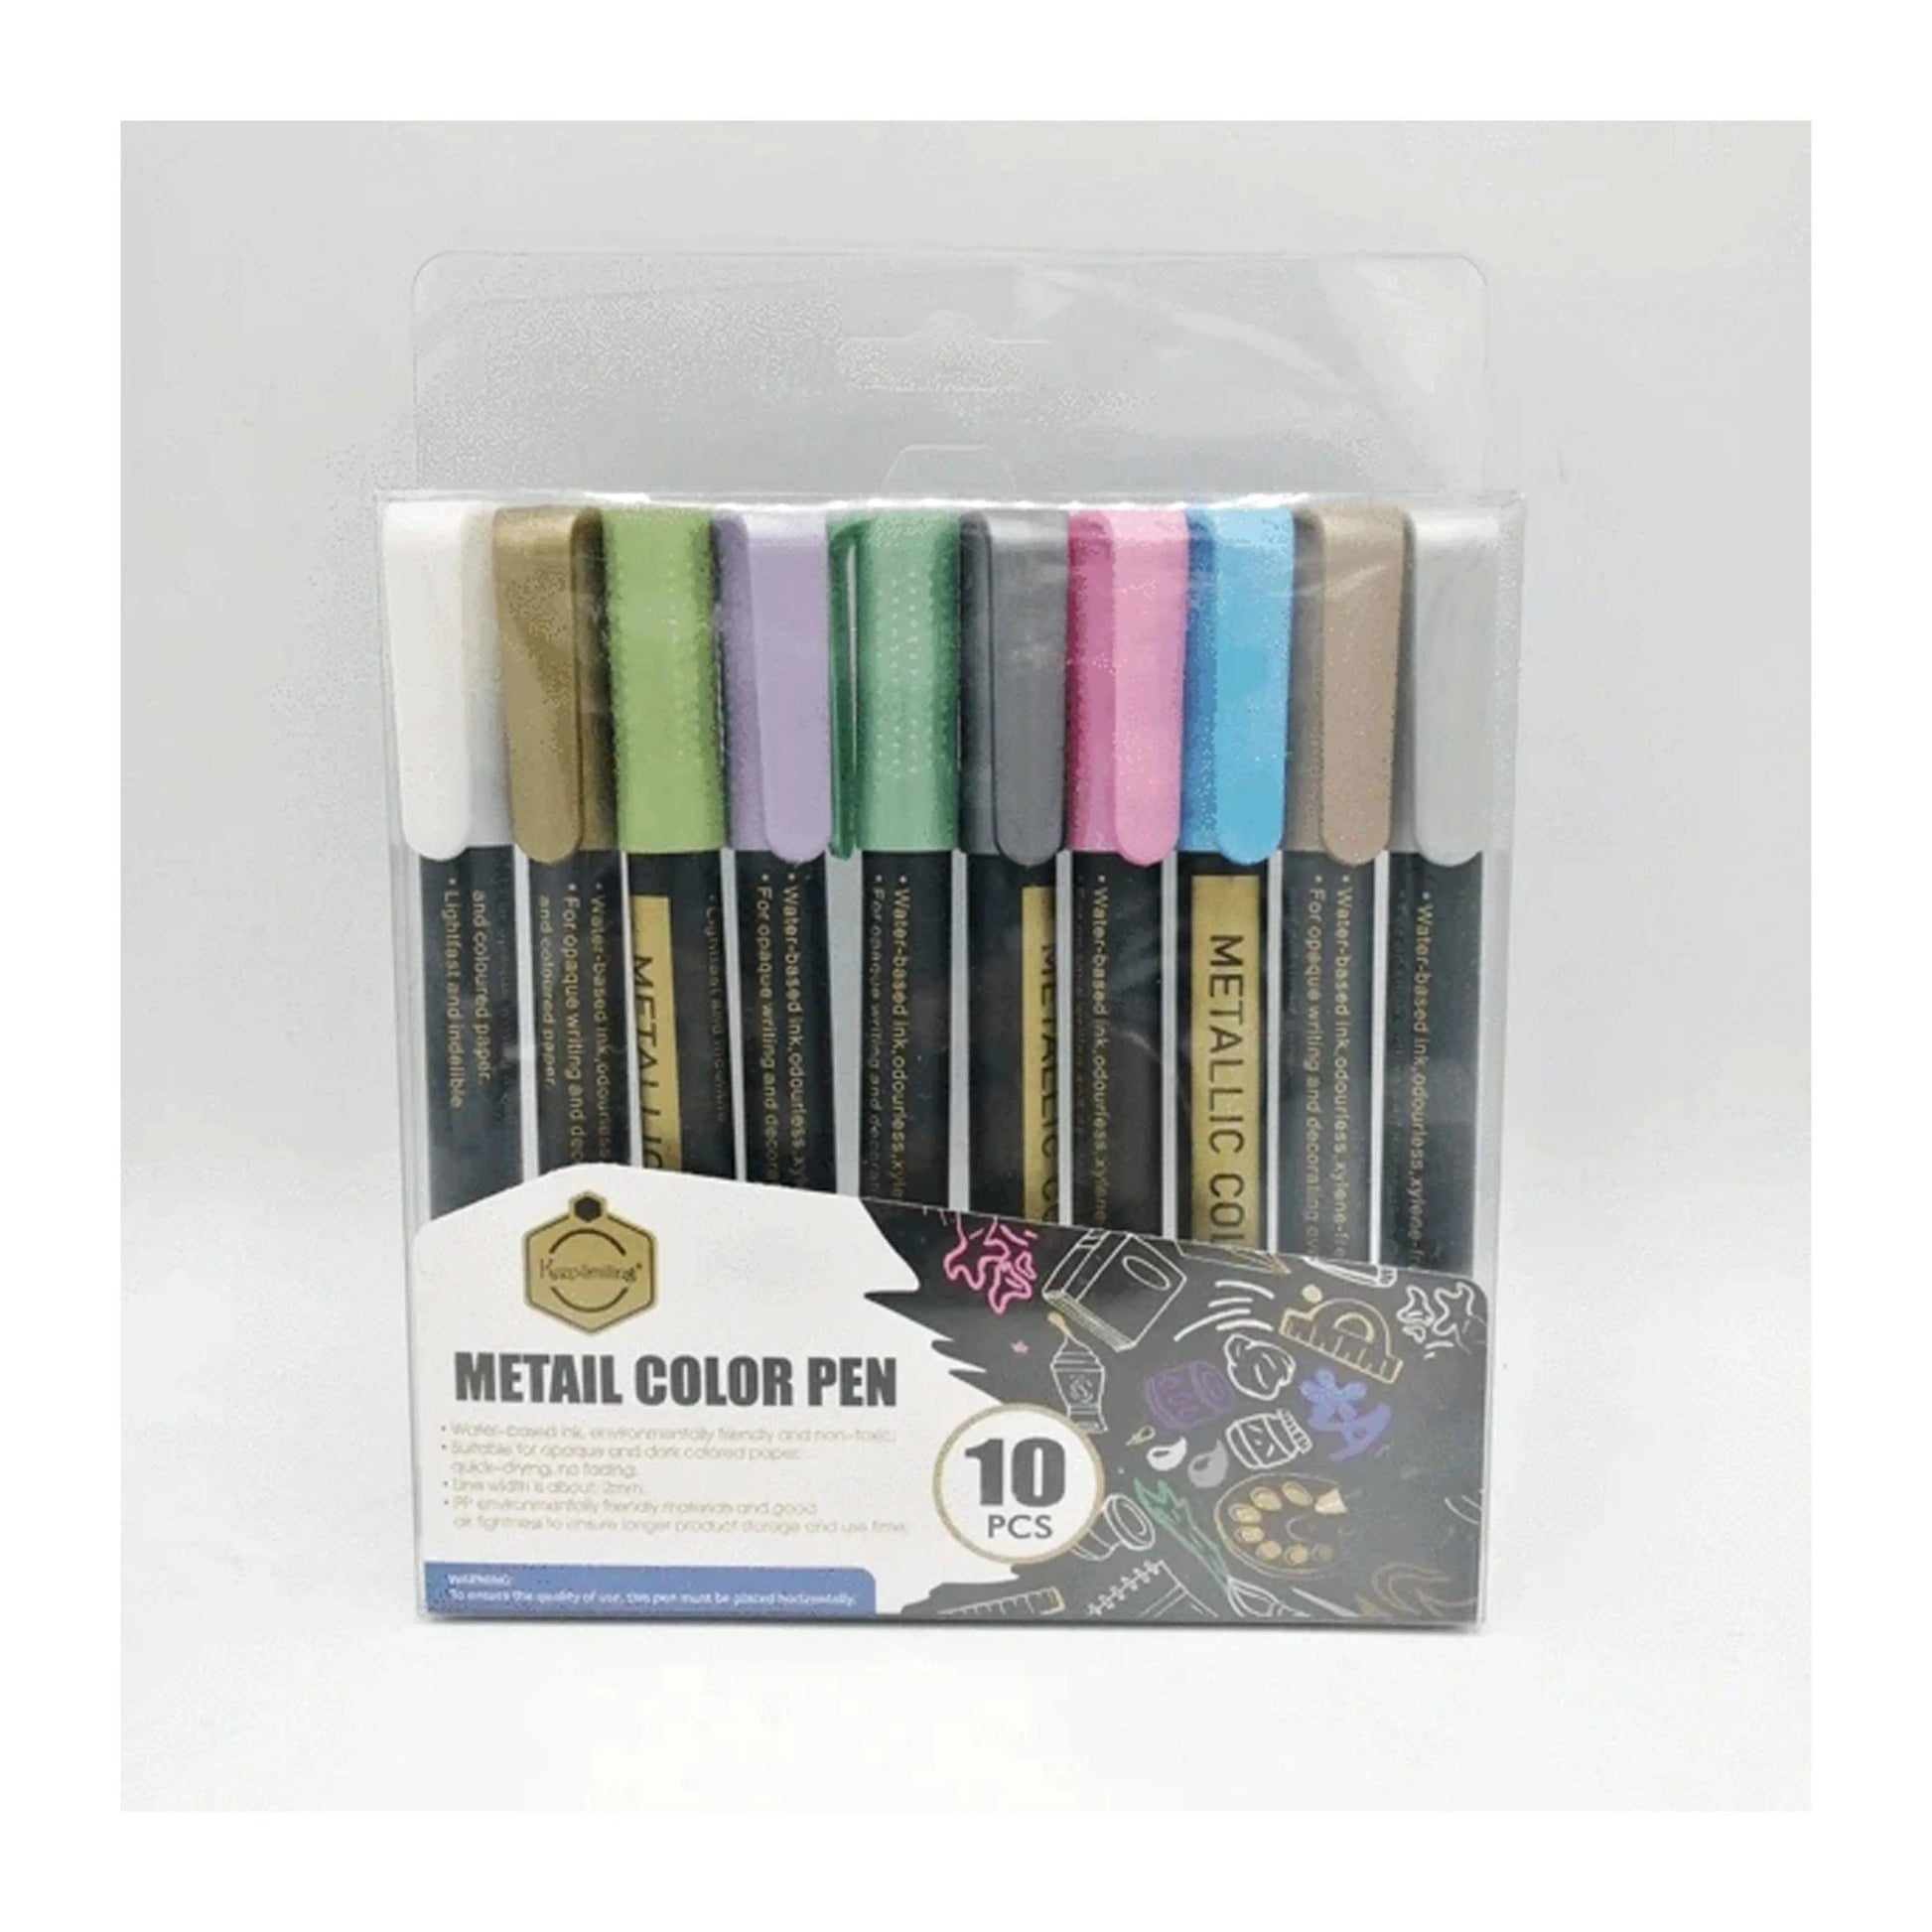 Keep Smiling Metallic Color Pen Pack Of 10 The Stationers